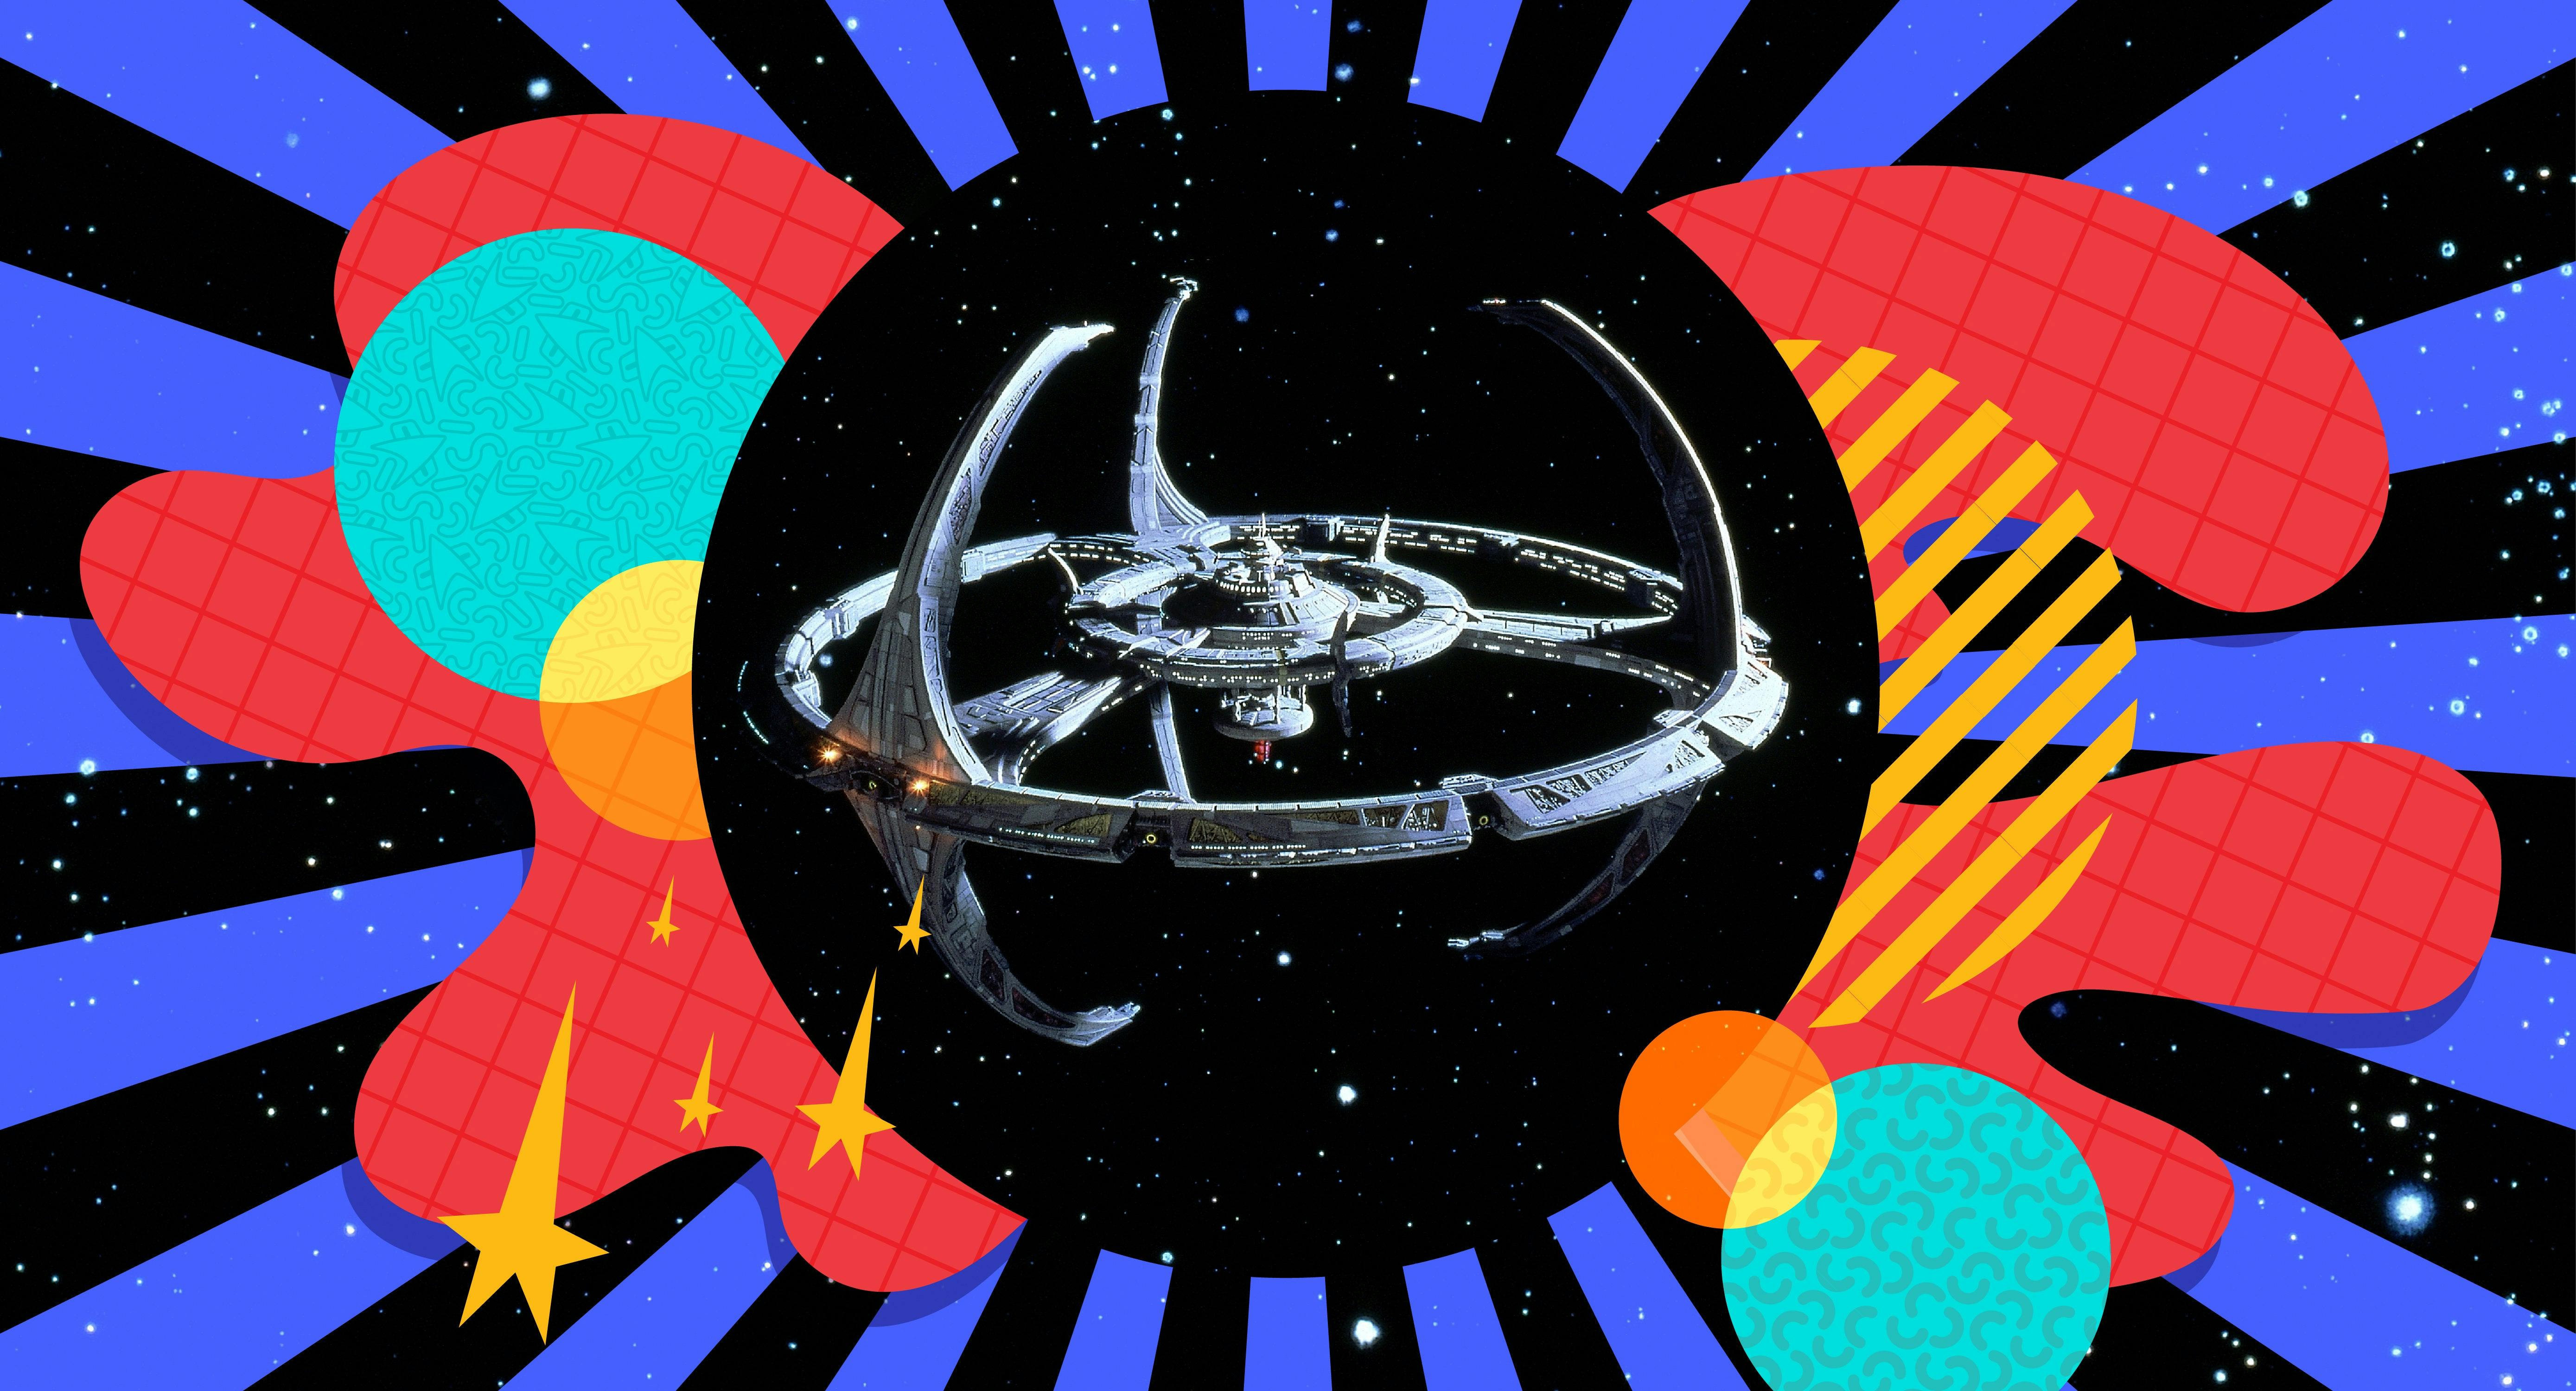 Illustrated banner showcasing Deep Space 9 (formerly Terok Nor) space station surrounded by bold colors and shapes